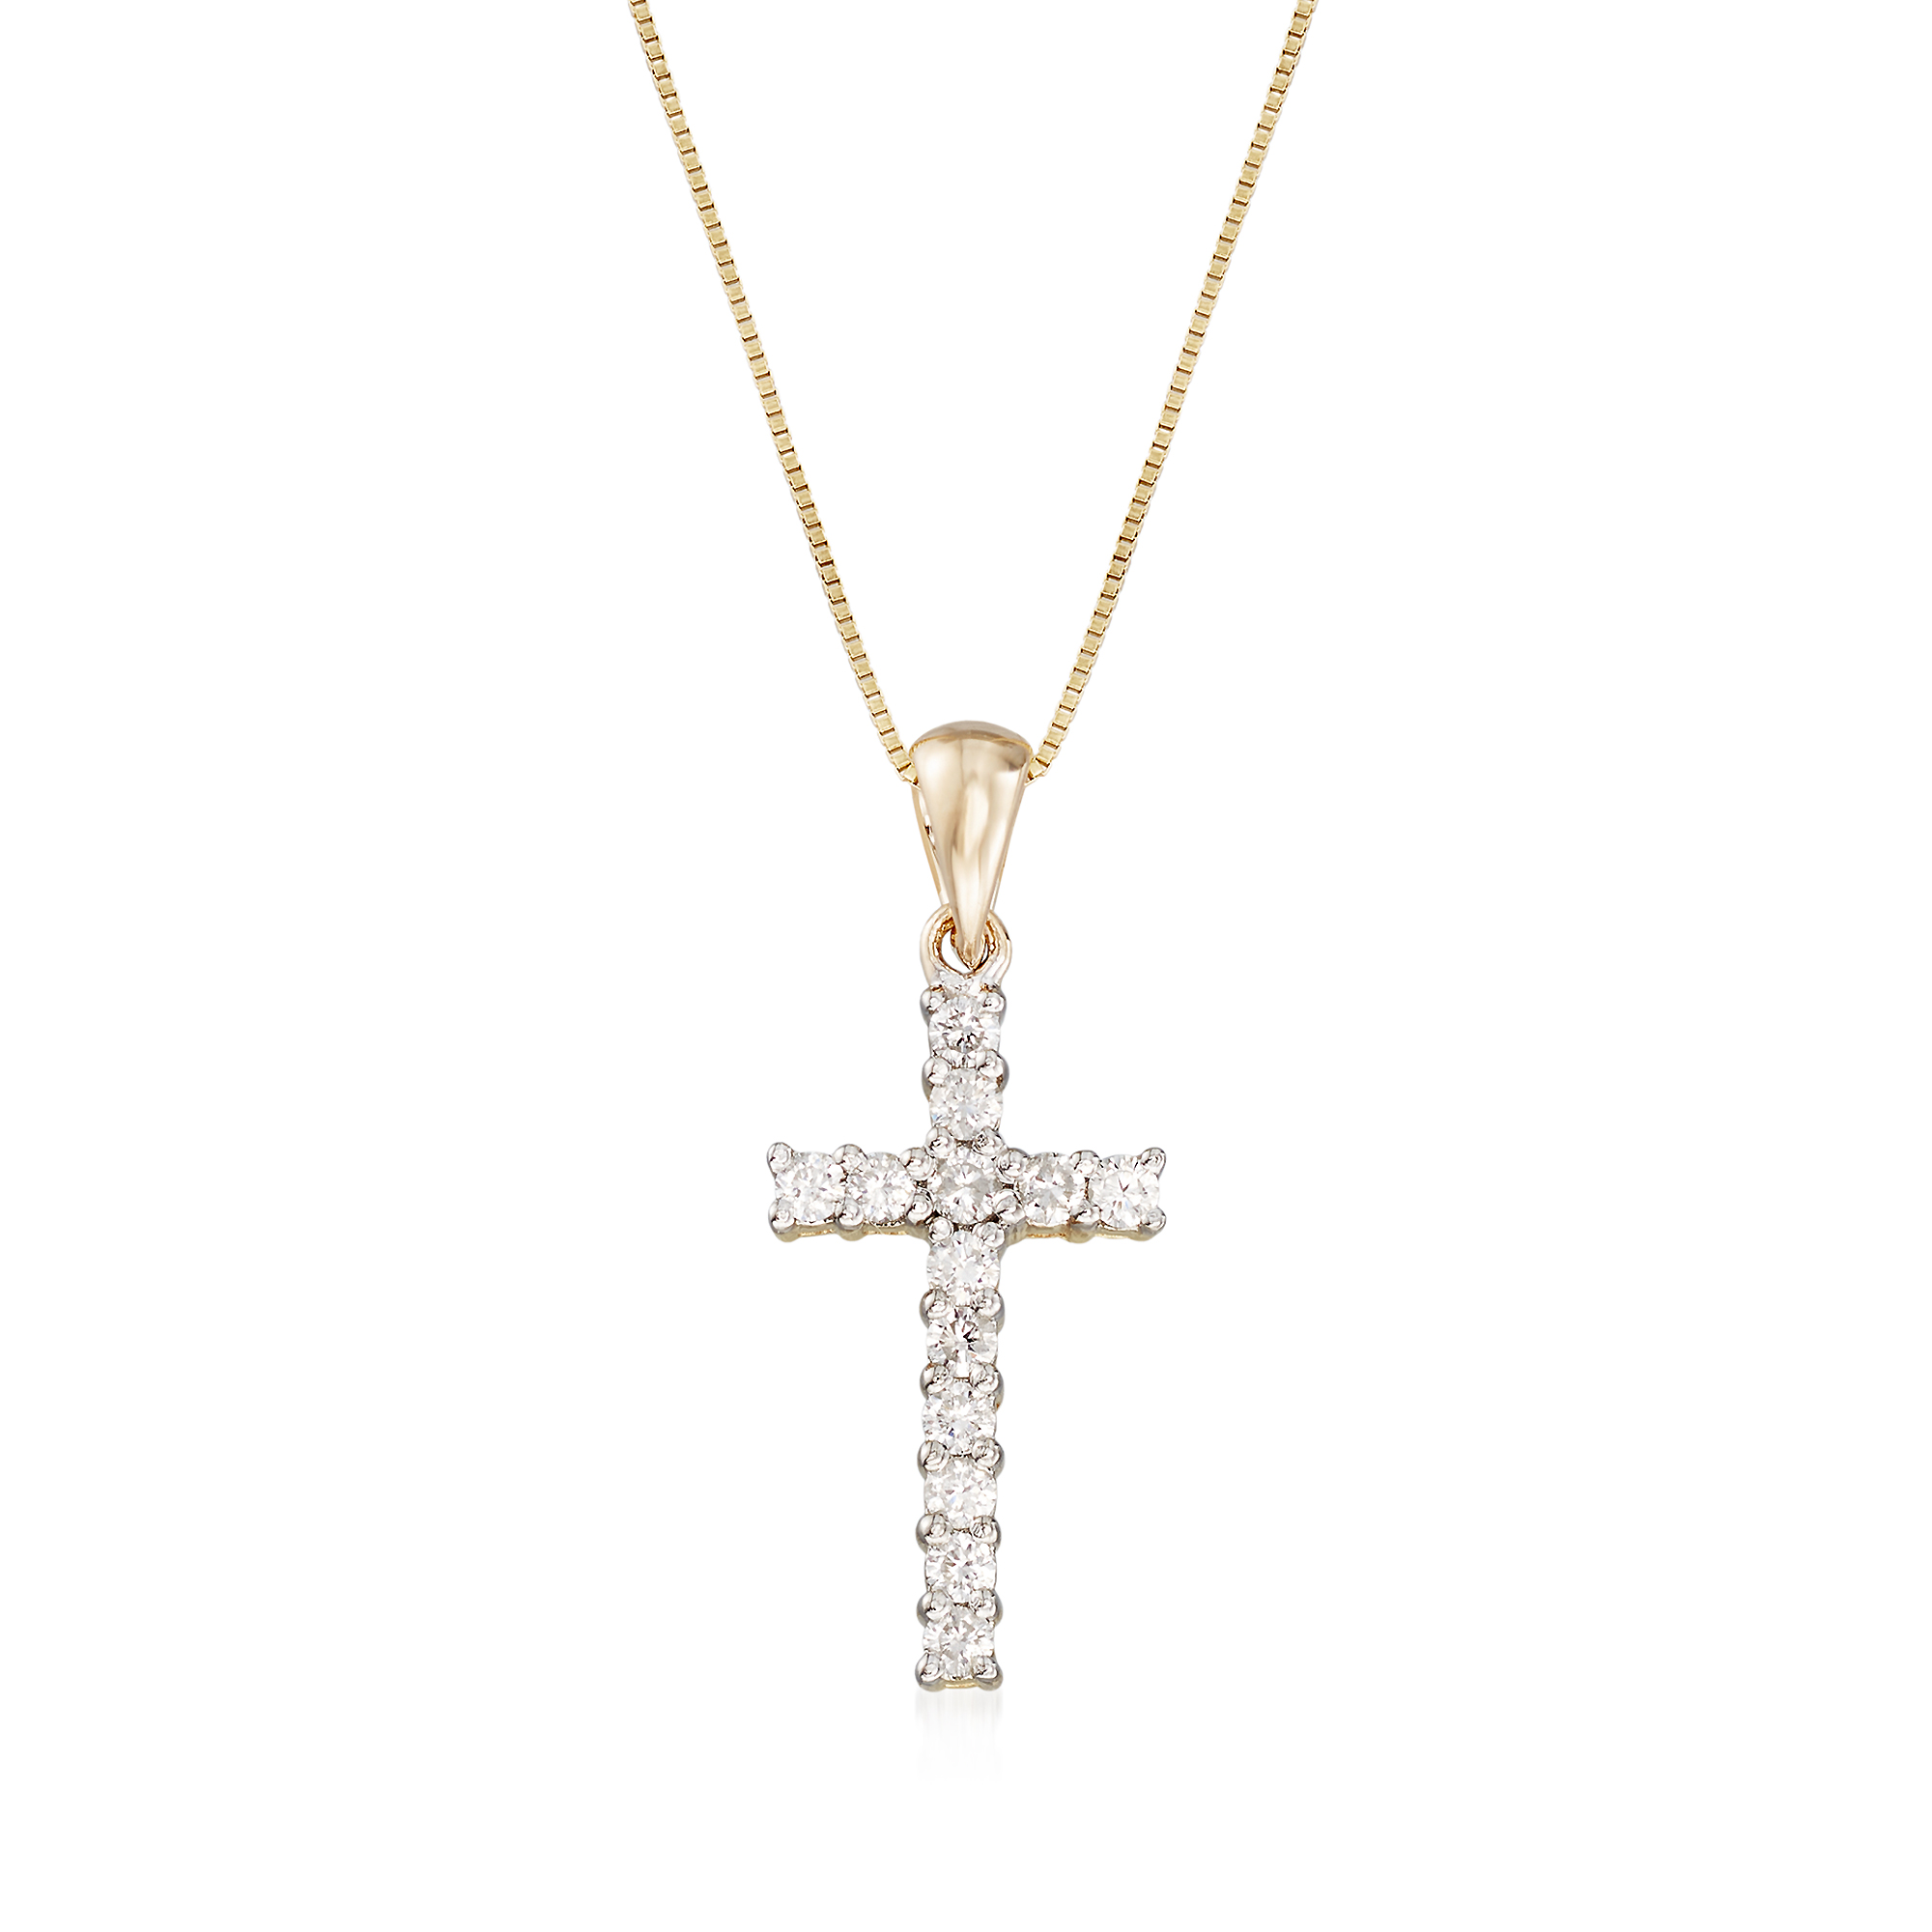 .25 ct. t.w. Diamond Cross Pendant Necklace in 14kt Yellow Gold. 18